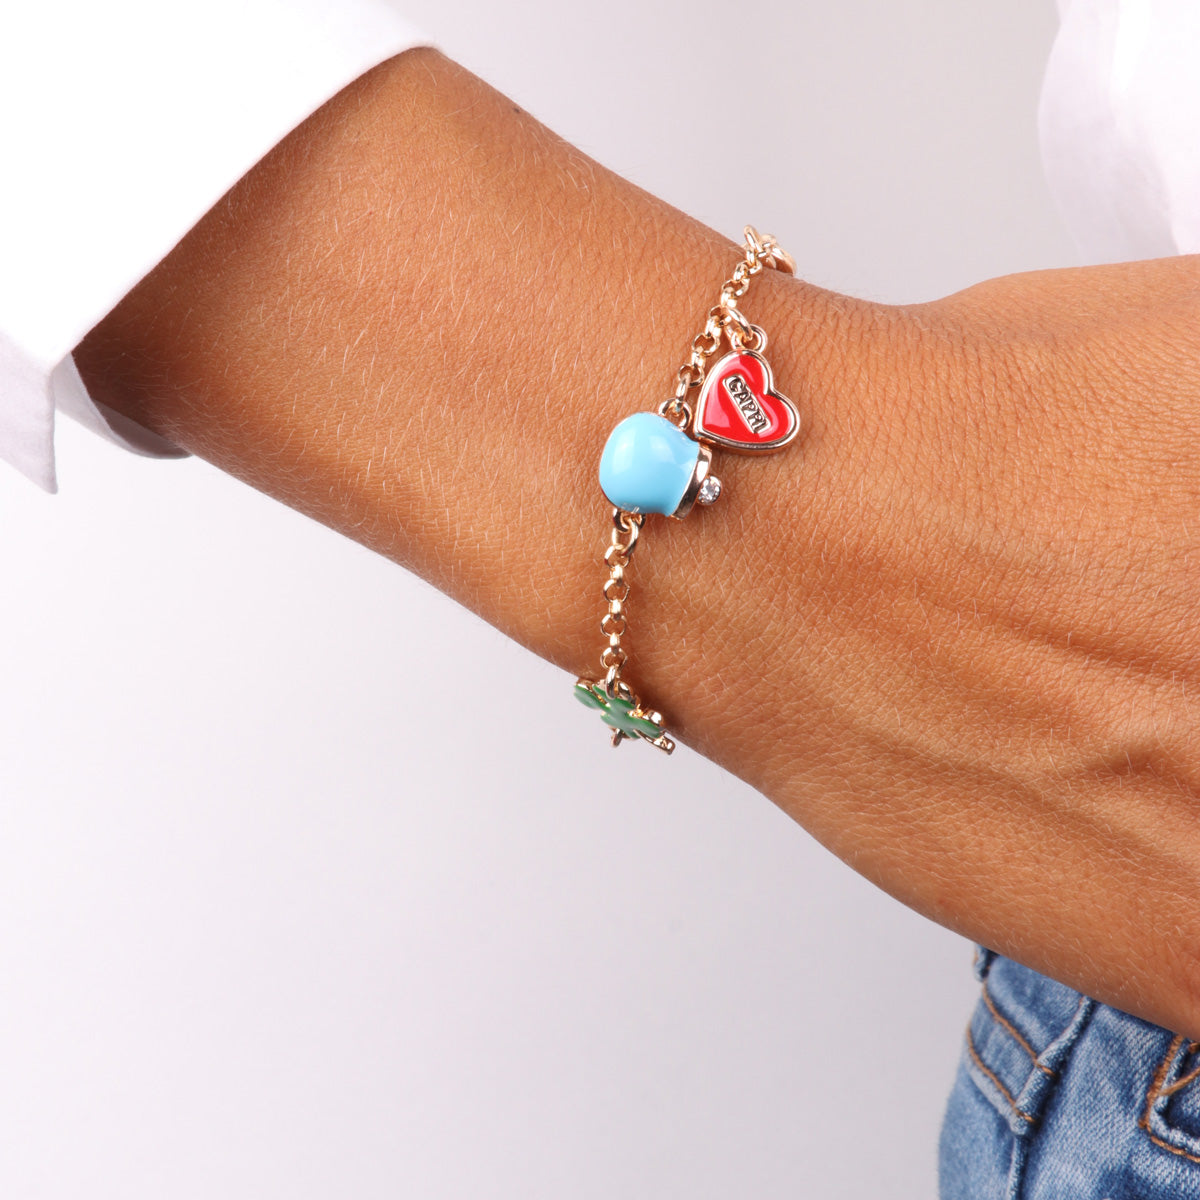 Metal bracelet with charming bell, heart with capri writing and sun with white pearl